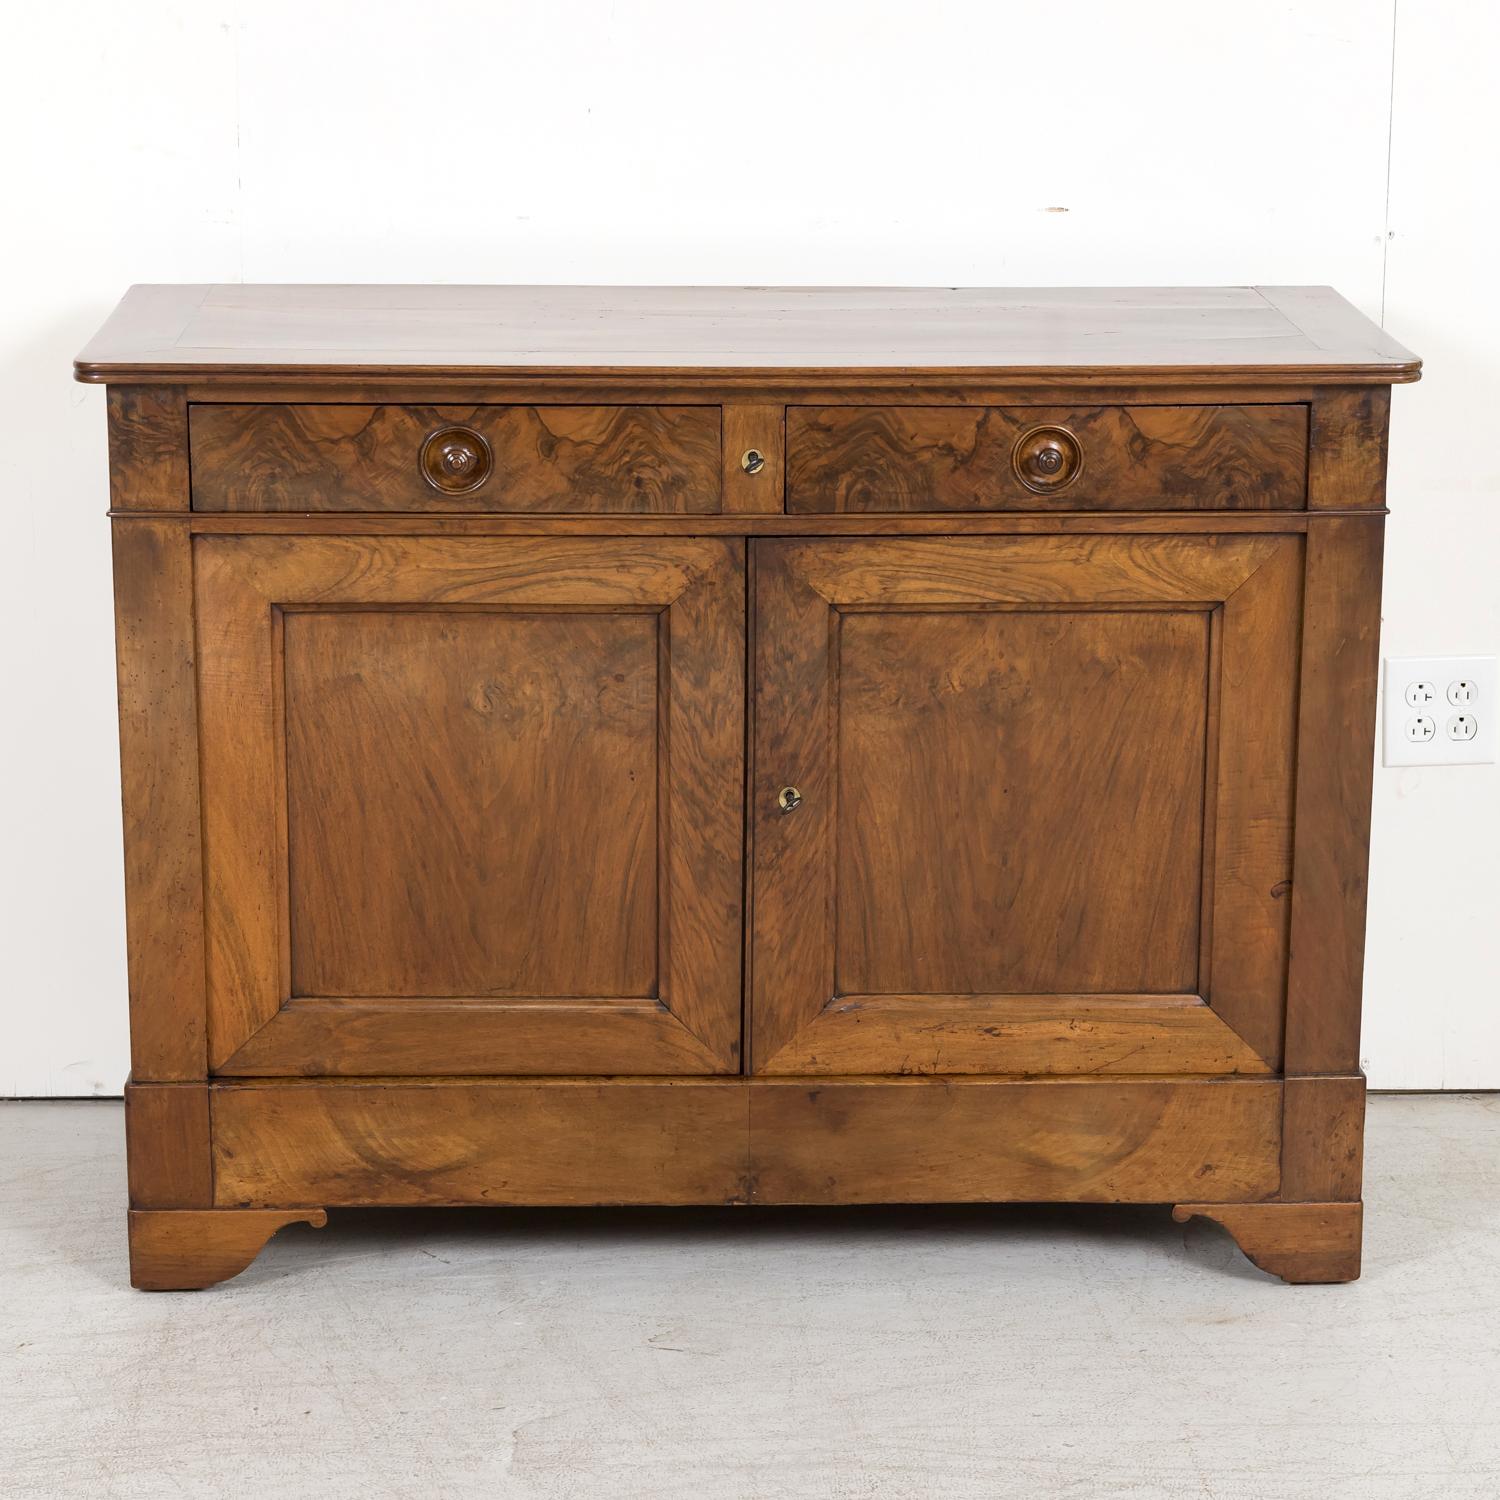 A handsome 19th century French Louis Philippe style buffet handcrafted of walnut with a bookmatched walnut front near Carcassonne, a fortified city in the department of Aude, in the region of Occitanie, circa 1880s, having a banded plank top with